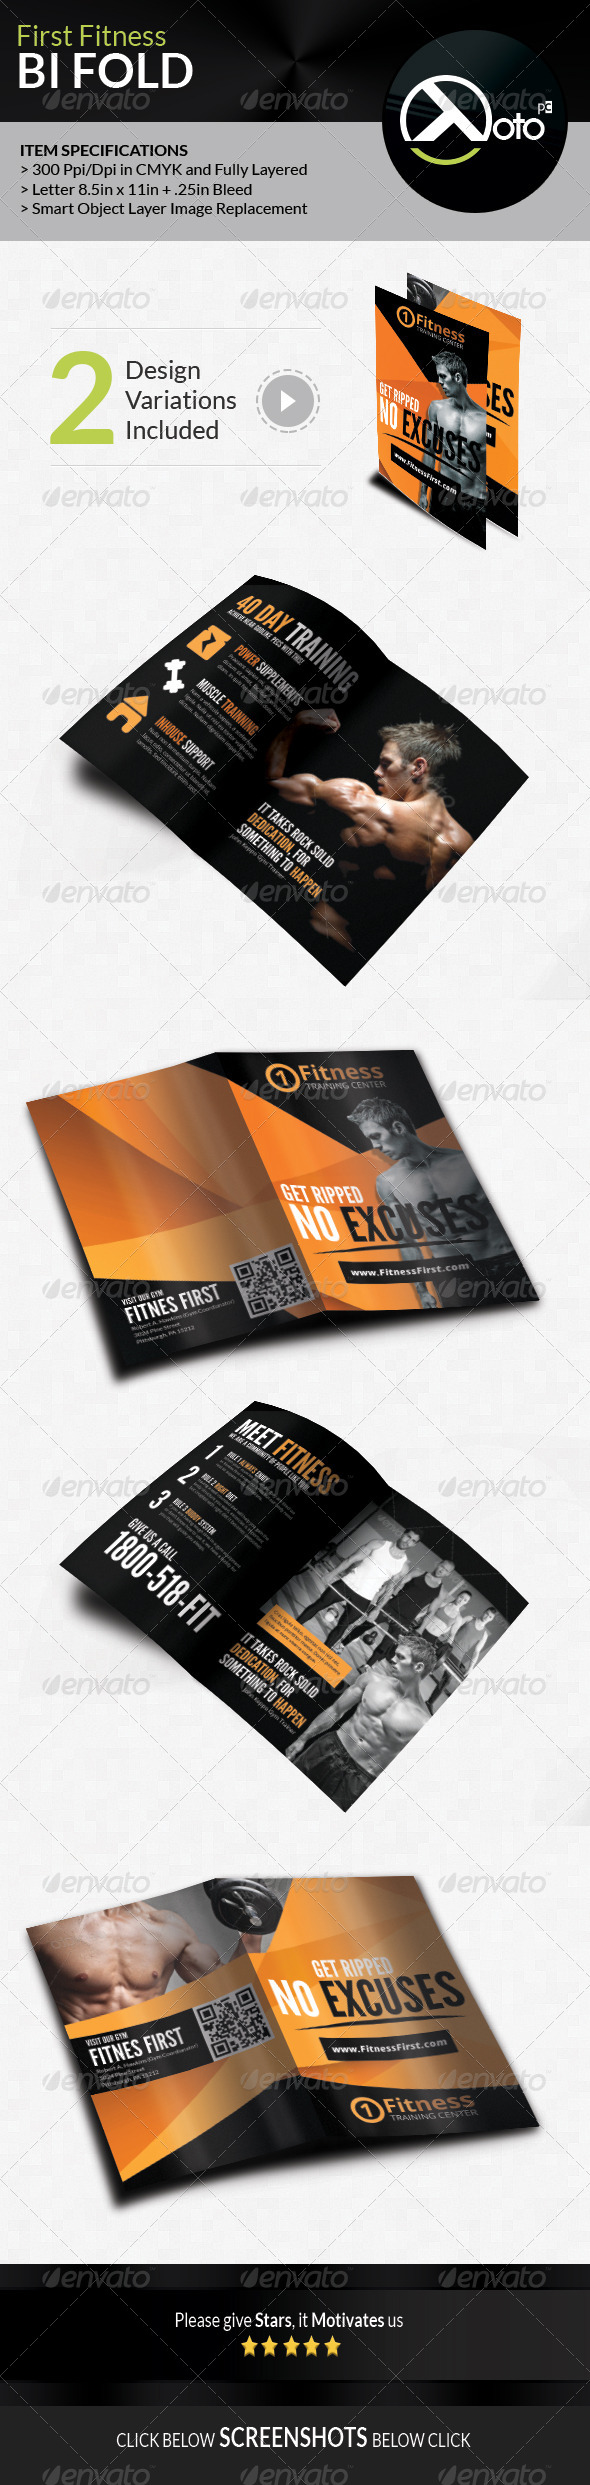 GraphicRiver First Fitness Body Weight Training Bifold 7692446